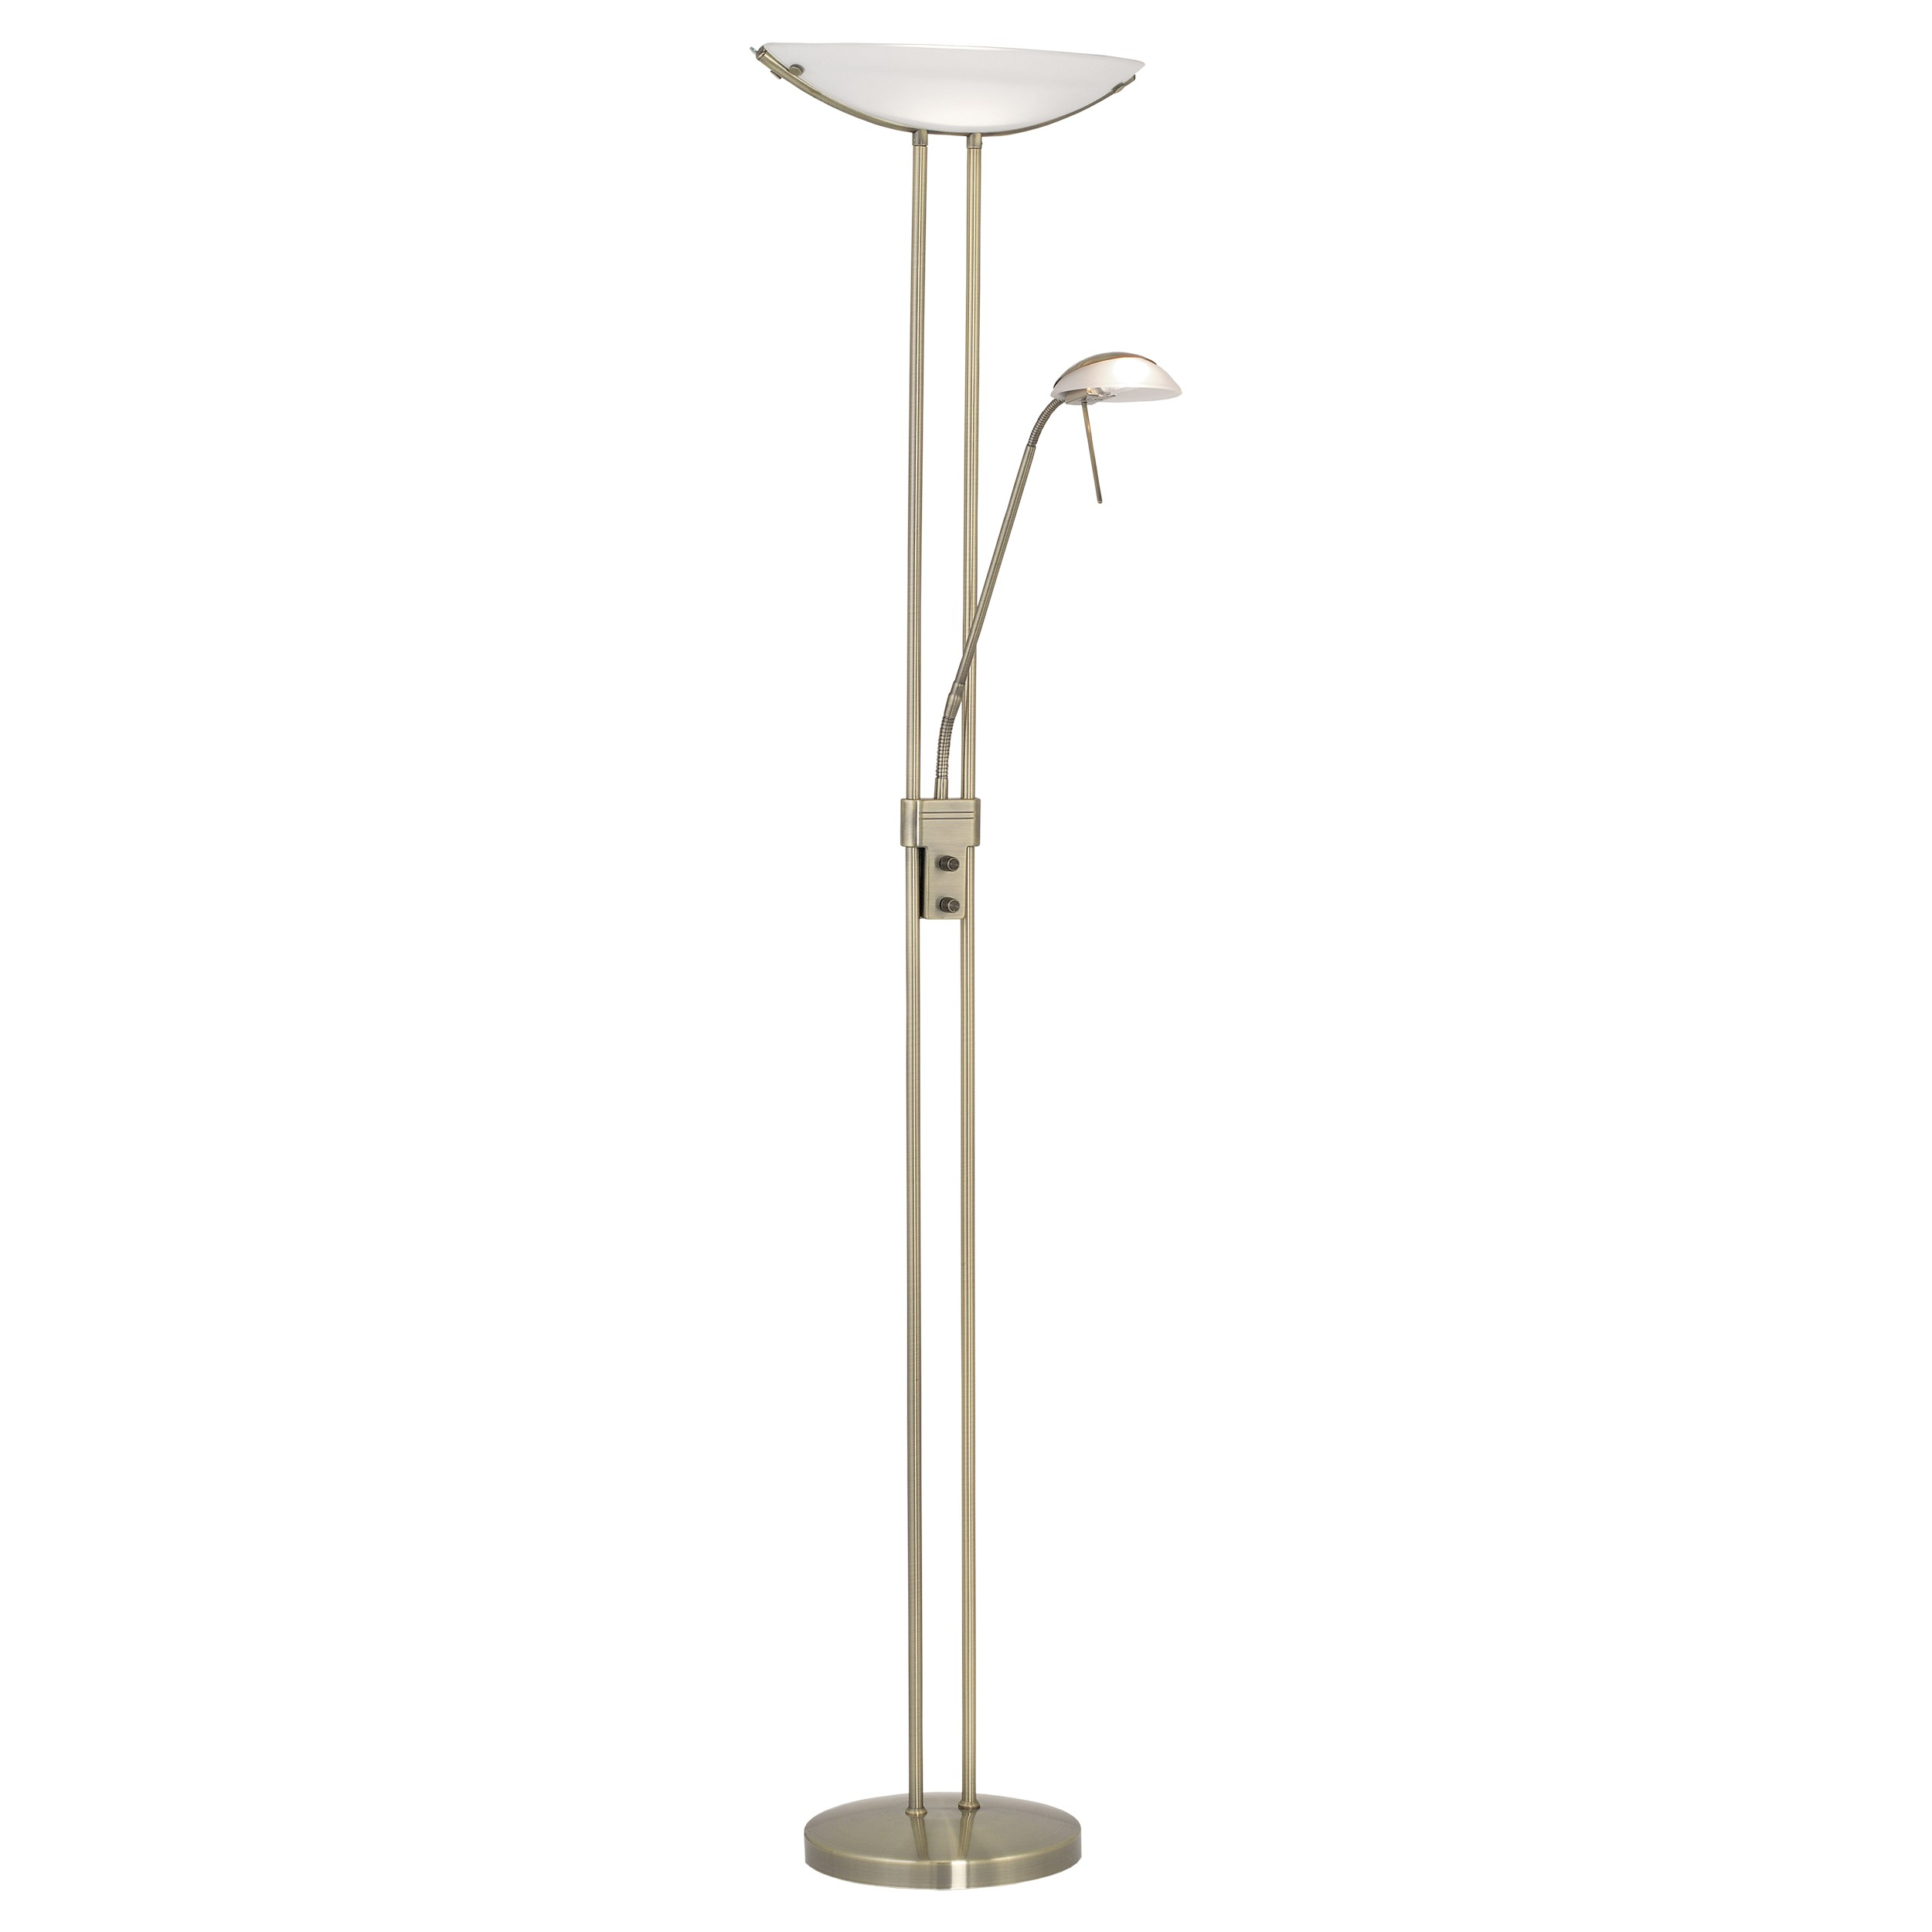 2 Light Traditional Dimmer Floor Lamp Bronzed And Glass pertaining to size 2500 X 2500